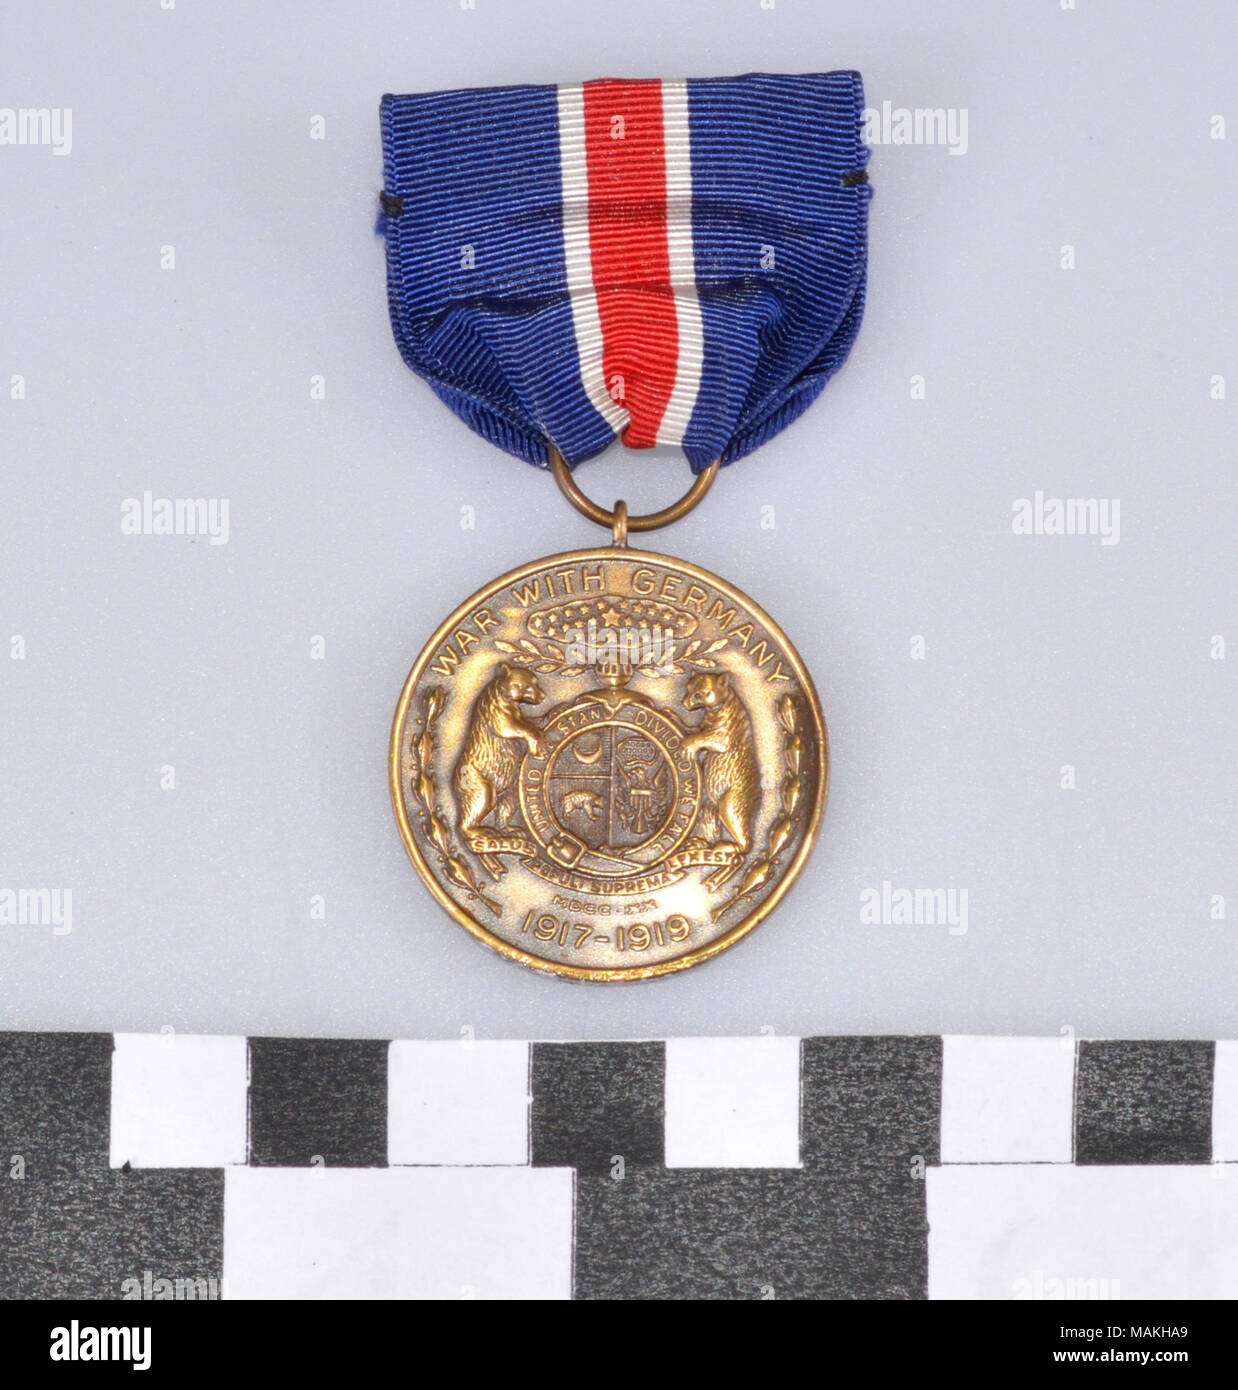 World War I Missouri Service Medal issued to John A. Borchers for his service in the 128th Field Artillery. Title: Missouri National Guard World War I Service Medal of John A. Borchers  . 1918. Stock Photo